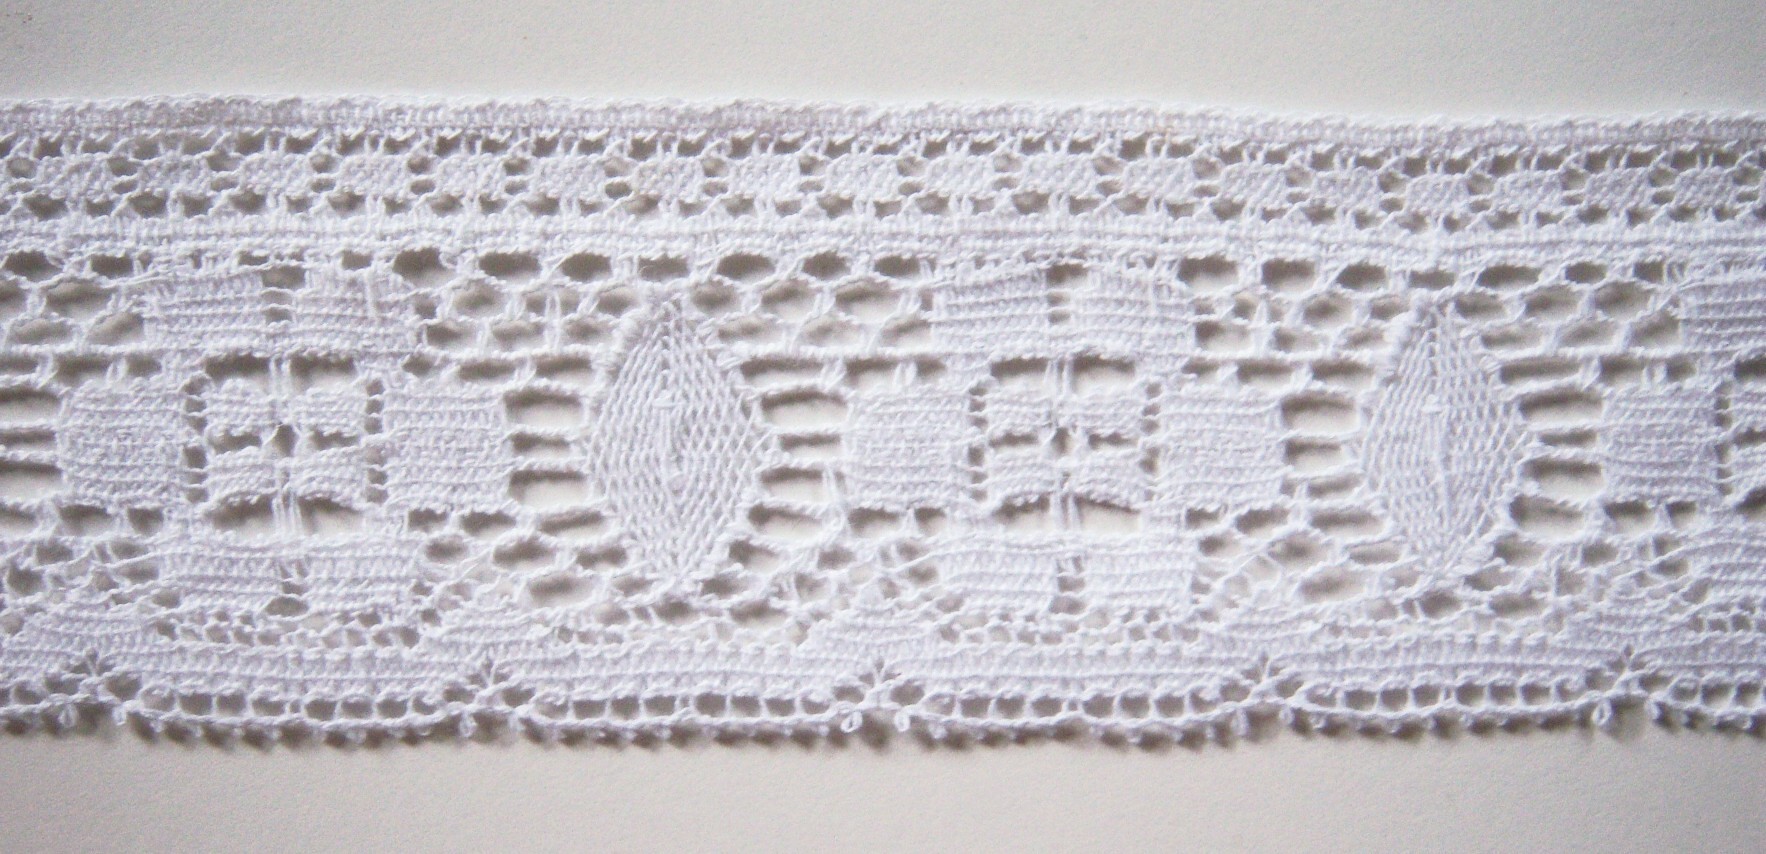 Was White 2 3/8" Cluny Lace